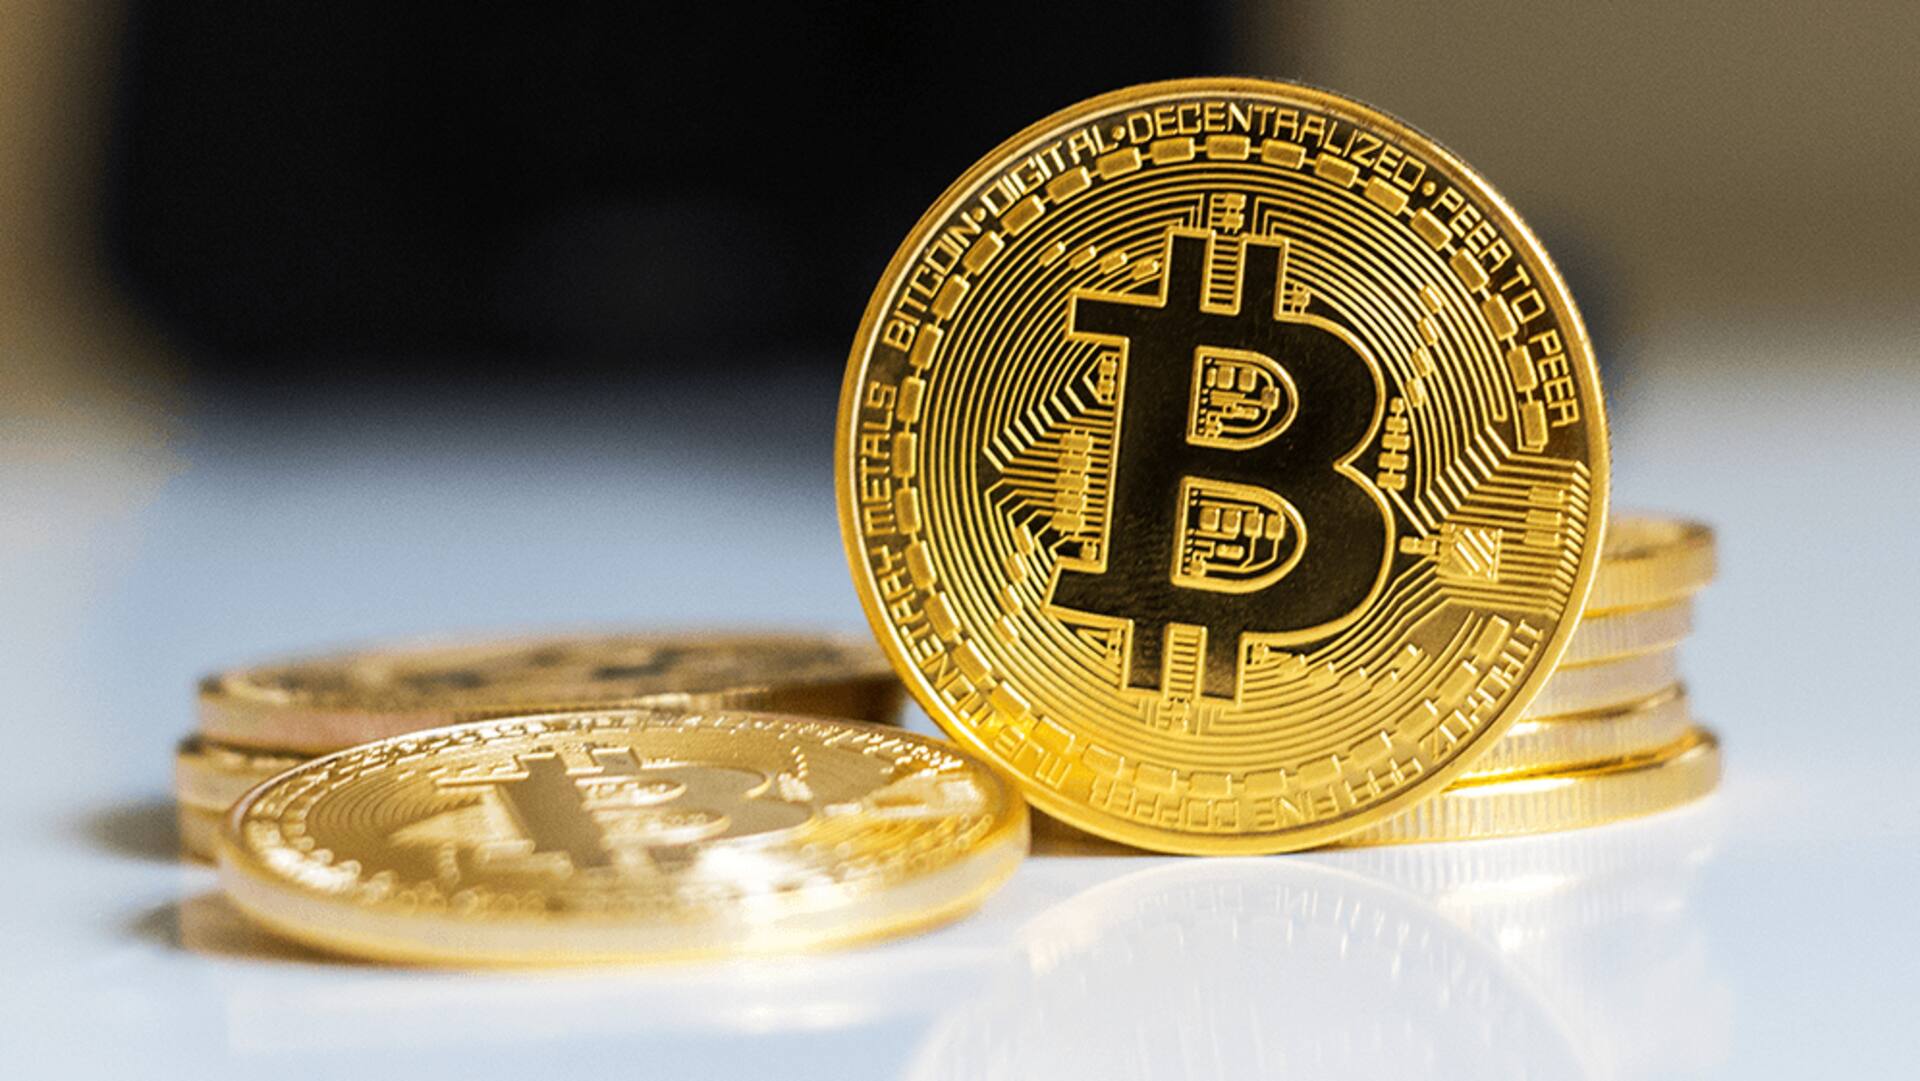 Cryptocurrency prices: Check today's rates of Bitcoin, Dogecoin, Tether, Solana